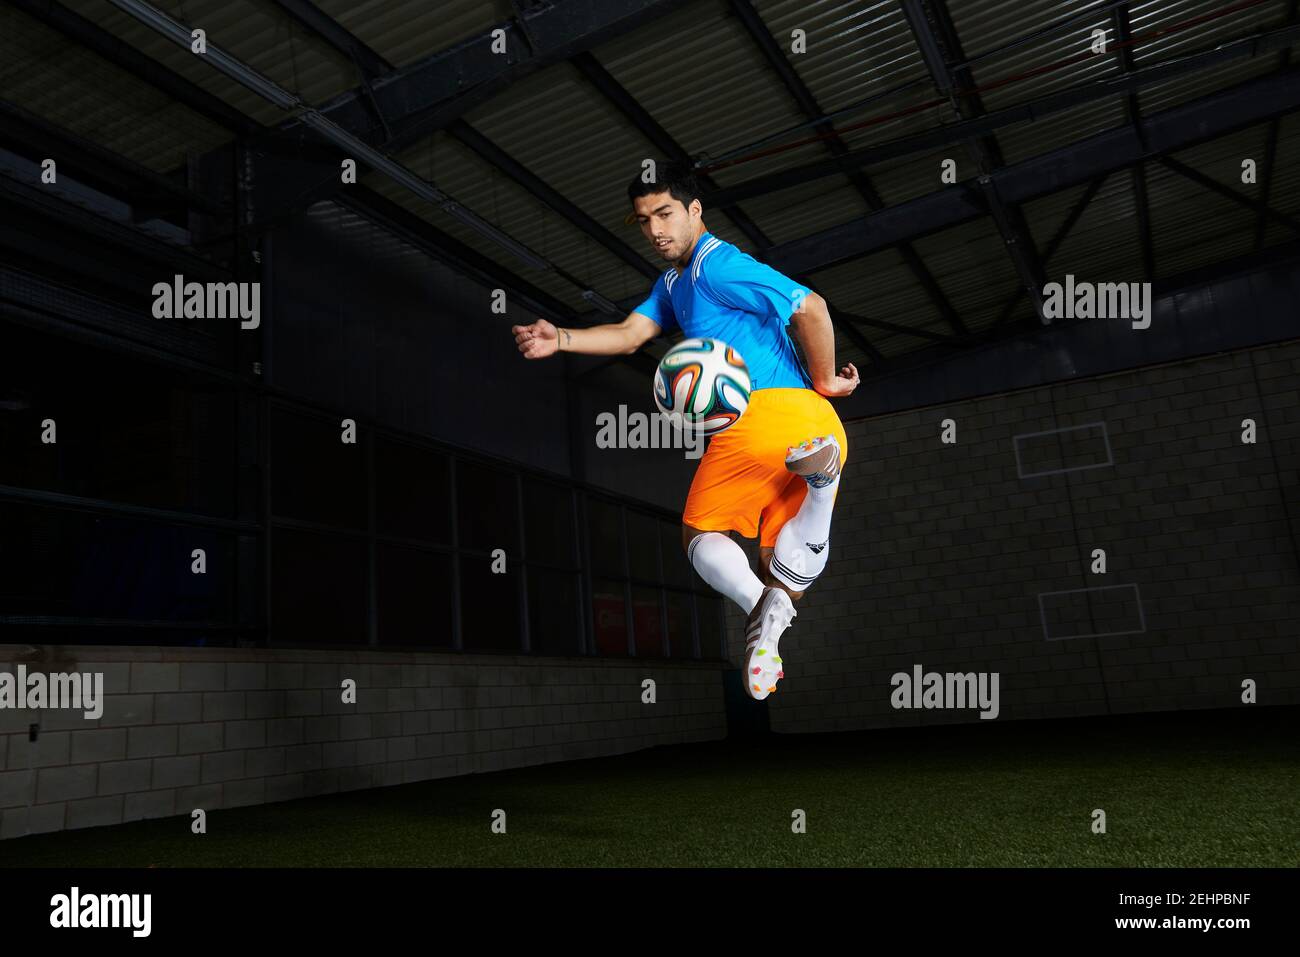 Football - Luis Suarez New Adidas Football Boot Launch Introducing the  worlds first knitted football boot, the adidas Samba primeknit football  boots Luis Suarez launches the new adidas Samba primeknit football boot